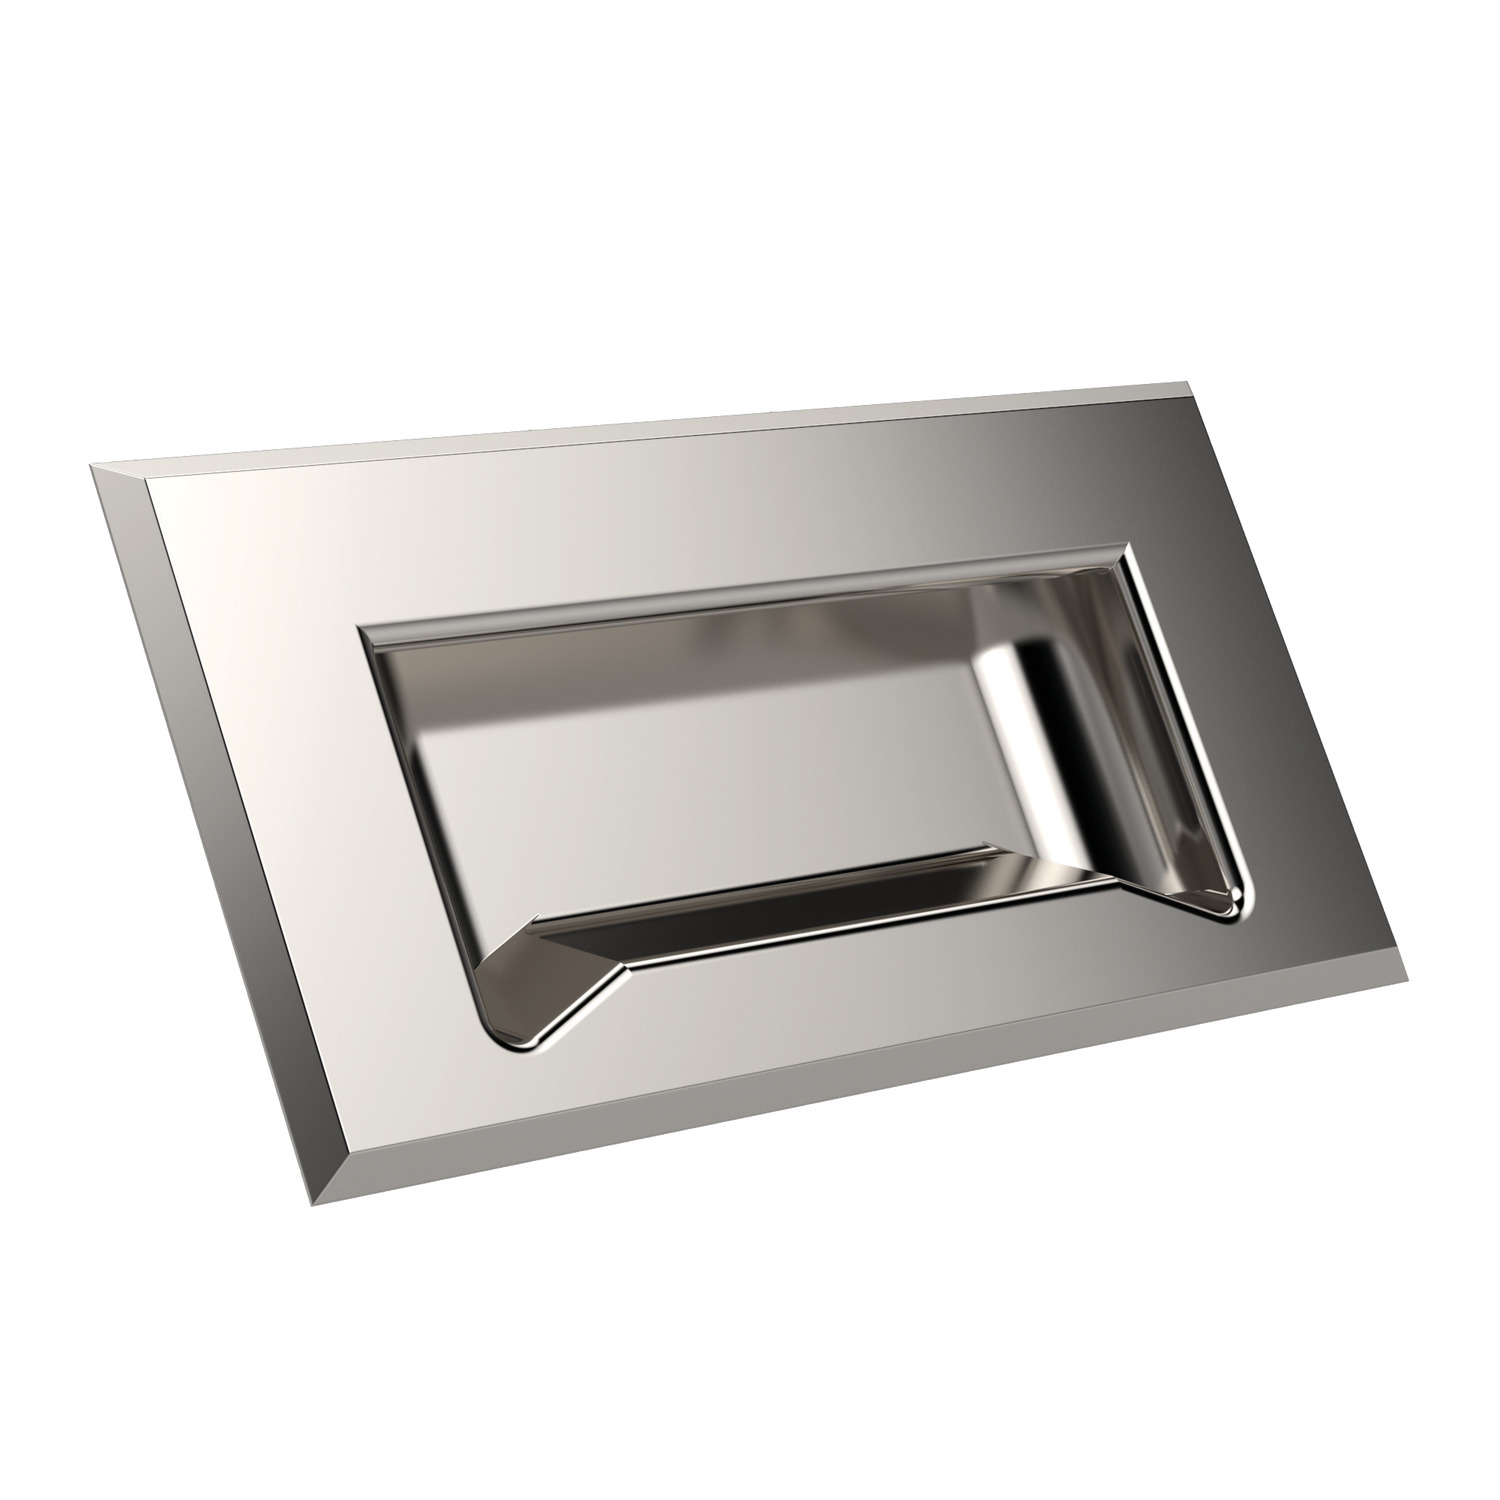 Recessed Pull Handles Rear mounting stainless steel recessed pull handles. AISI 304 satin finish. Supplied with stainless steel M4 Nut.